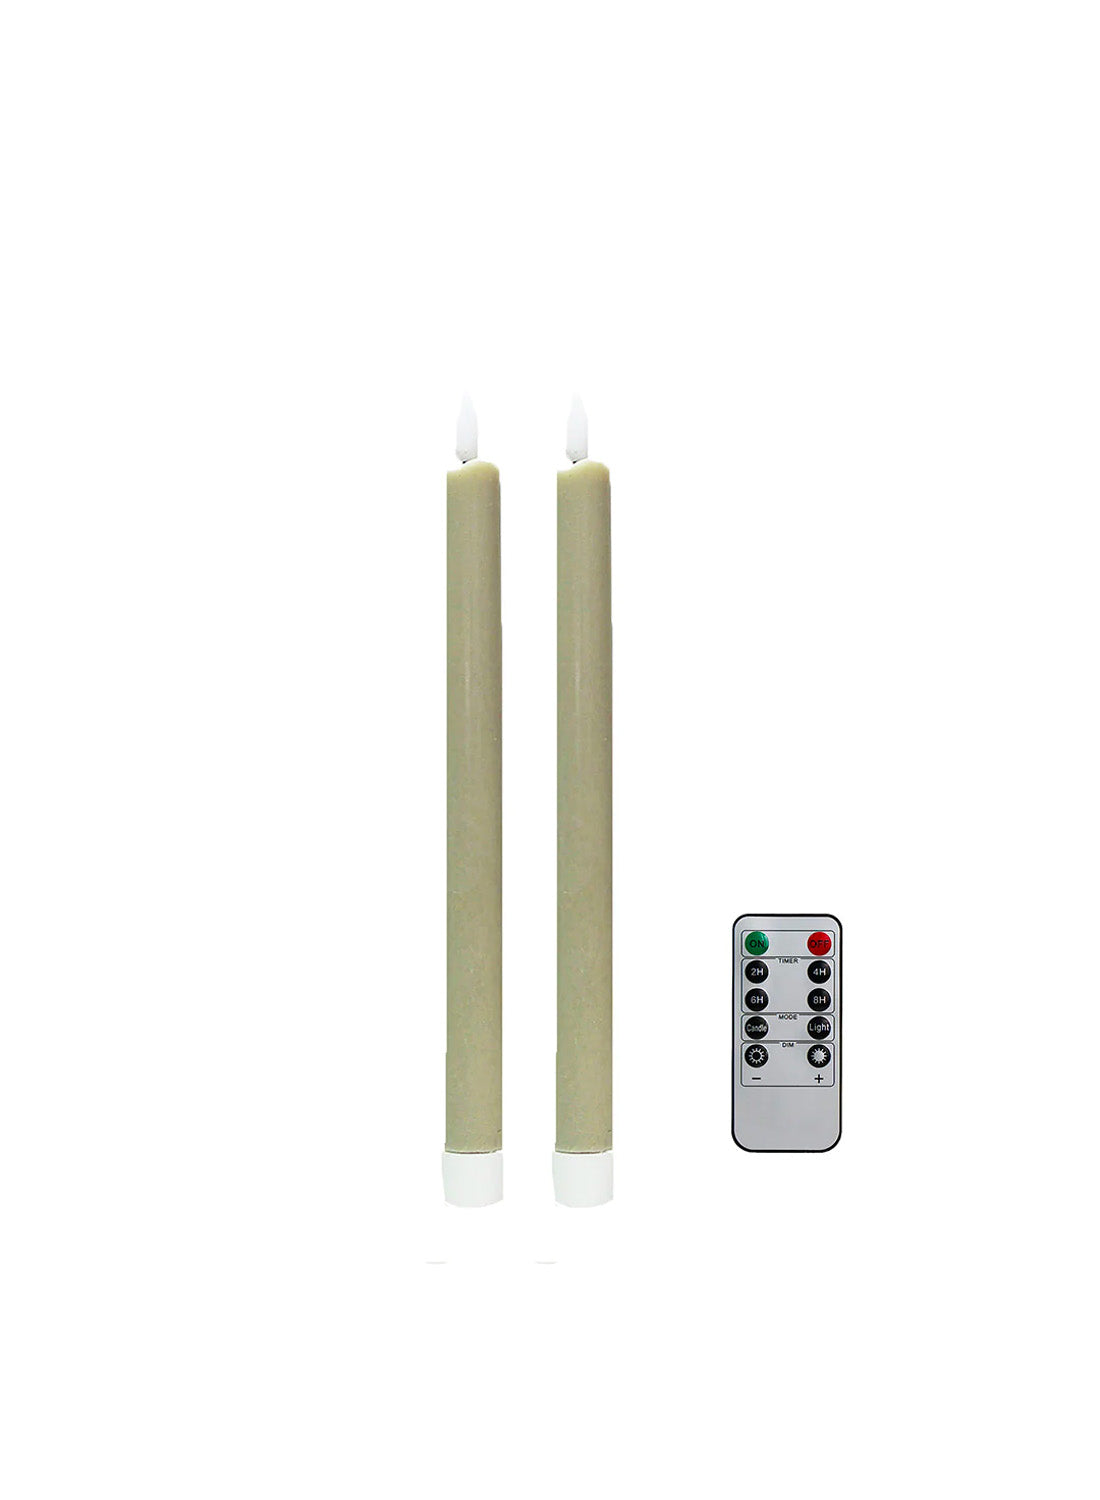 Addison Ross Cappuccino LED Candles, set of 2